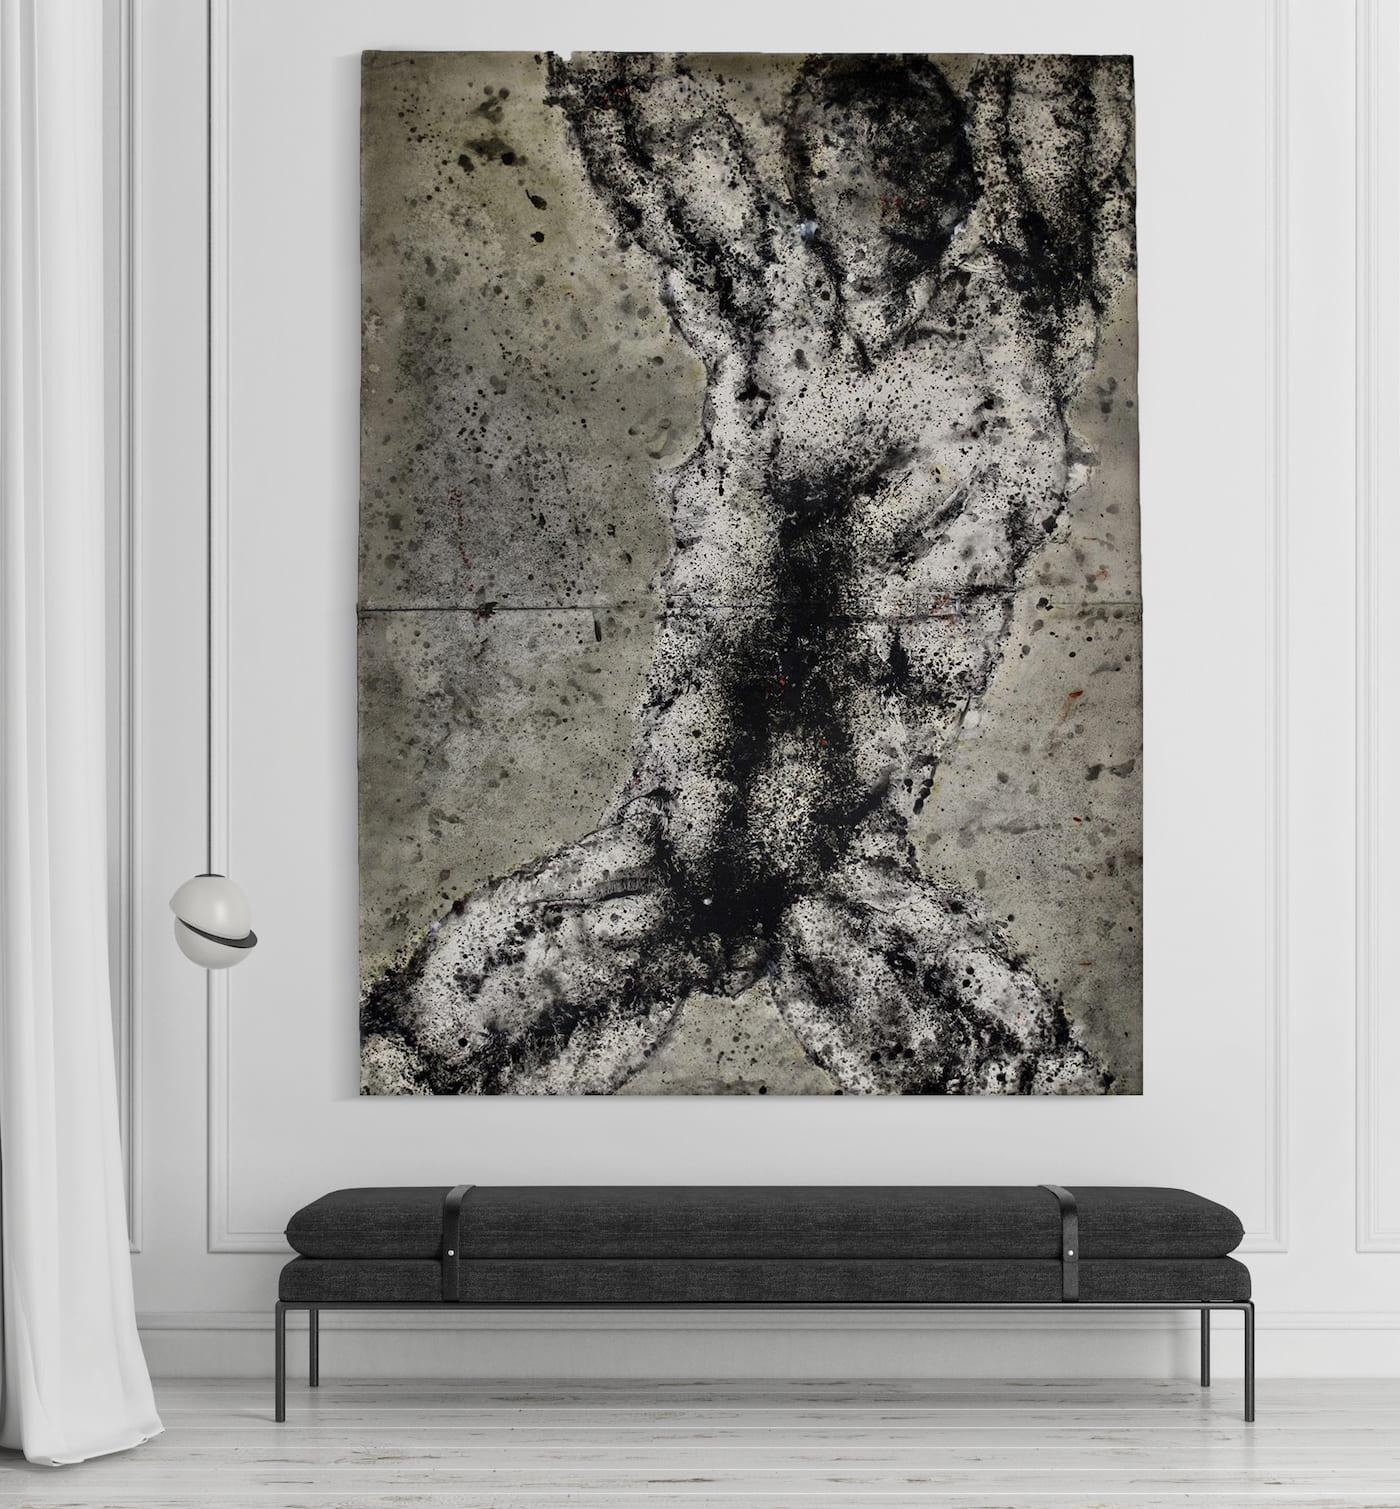 Body I by Ferle - Abstract painting, male body, movement, neutral tones, man - Painting by Elvire Ferle